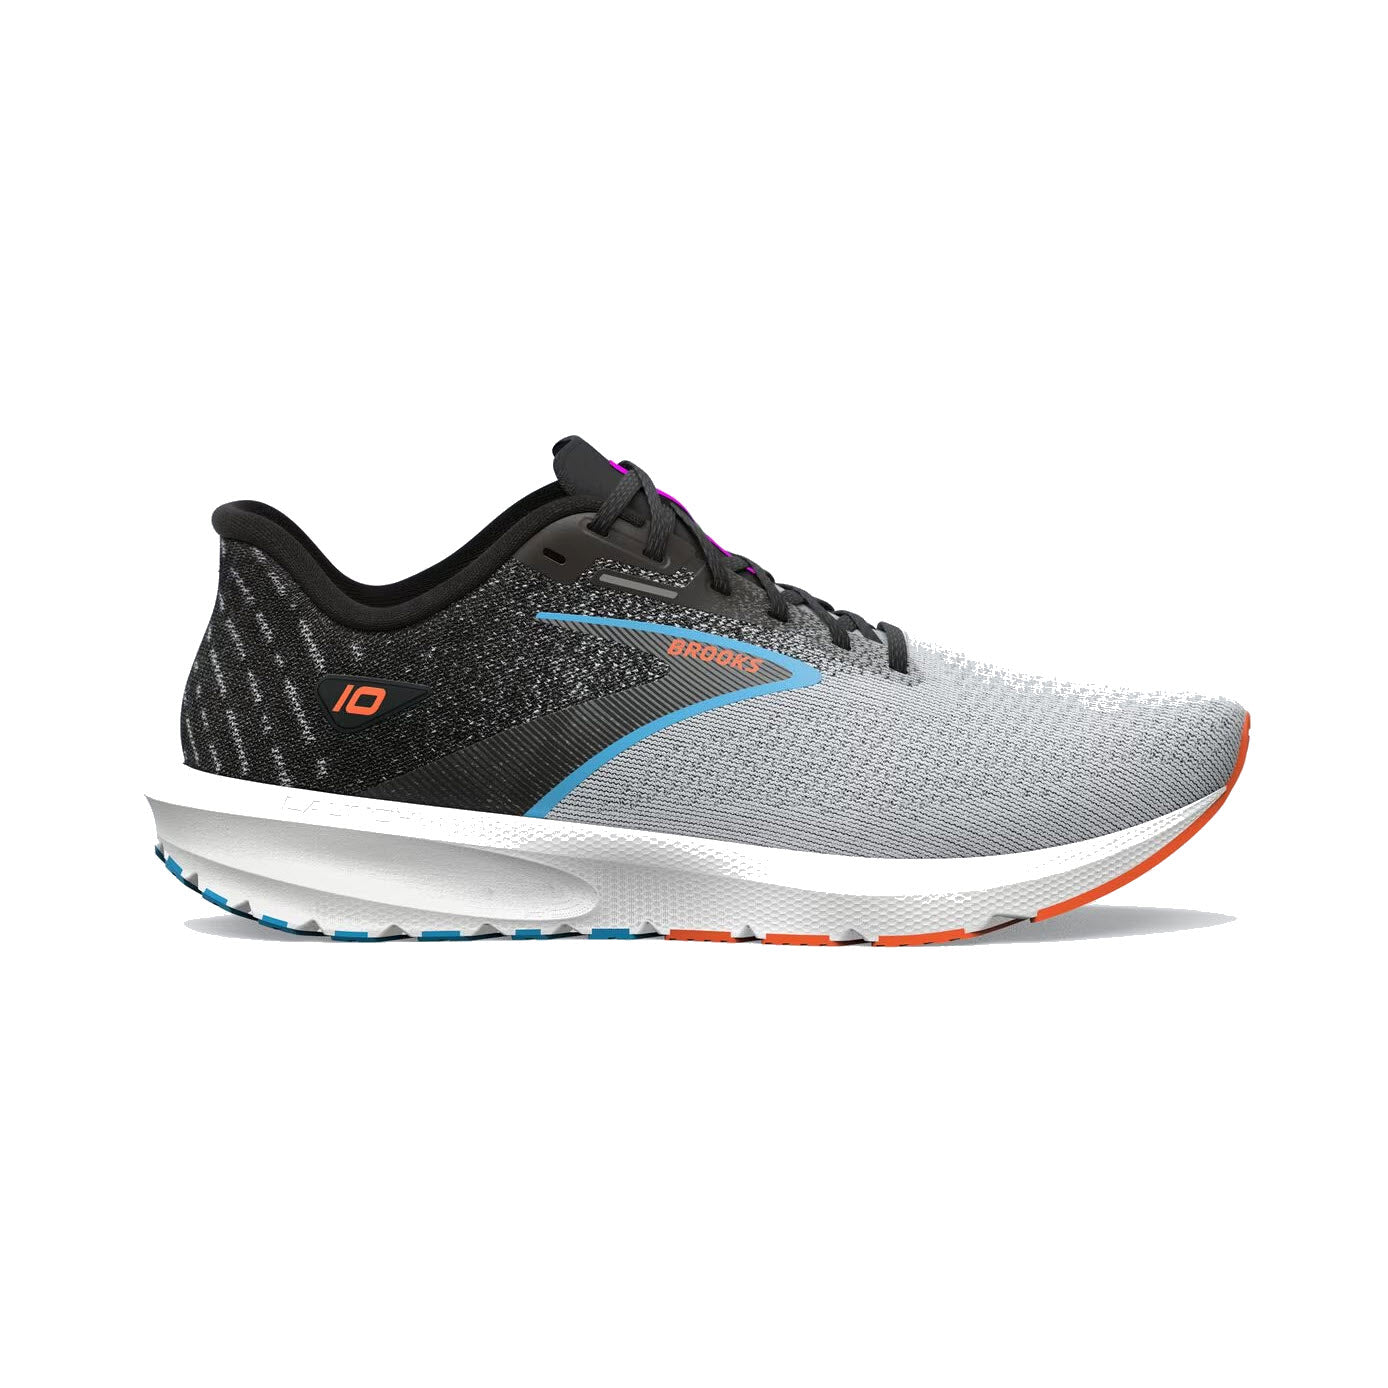 A pair of Brooks LAUNCH 10 BLACK/GREY/ORANGE CLOWN FISH road-running shoes, with a black and grey breathable upper and a white sole, highlighted by orange and blue accents.